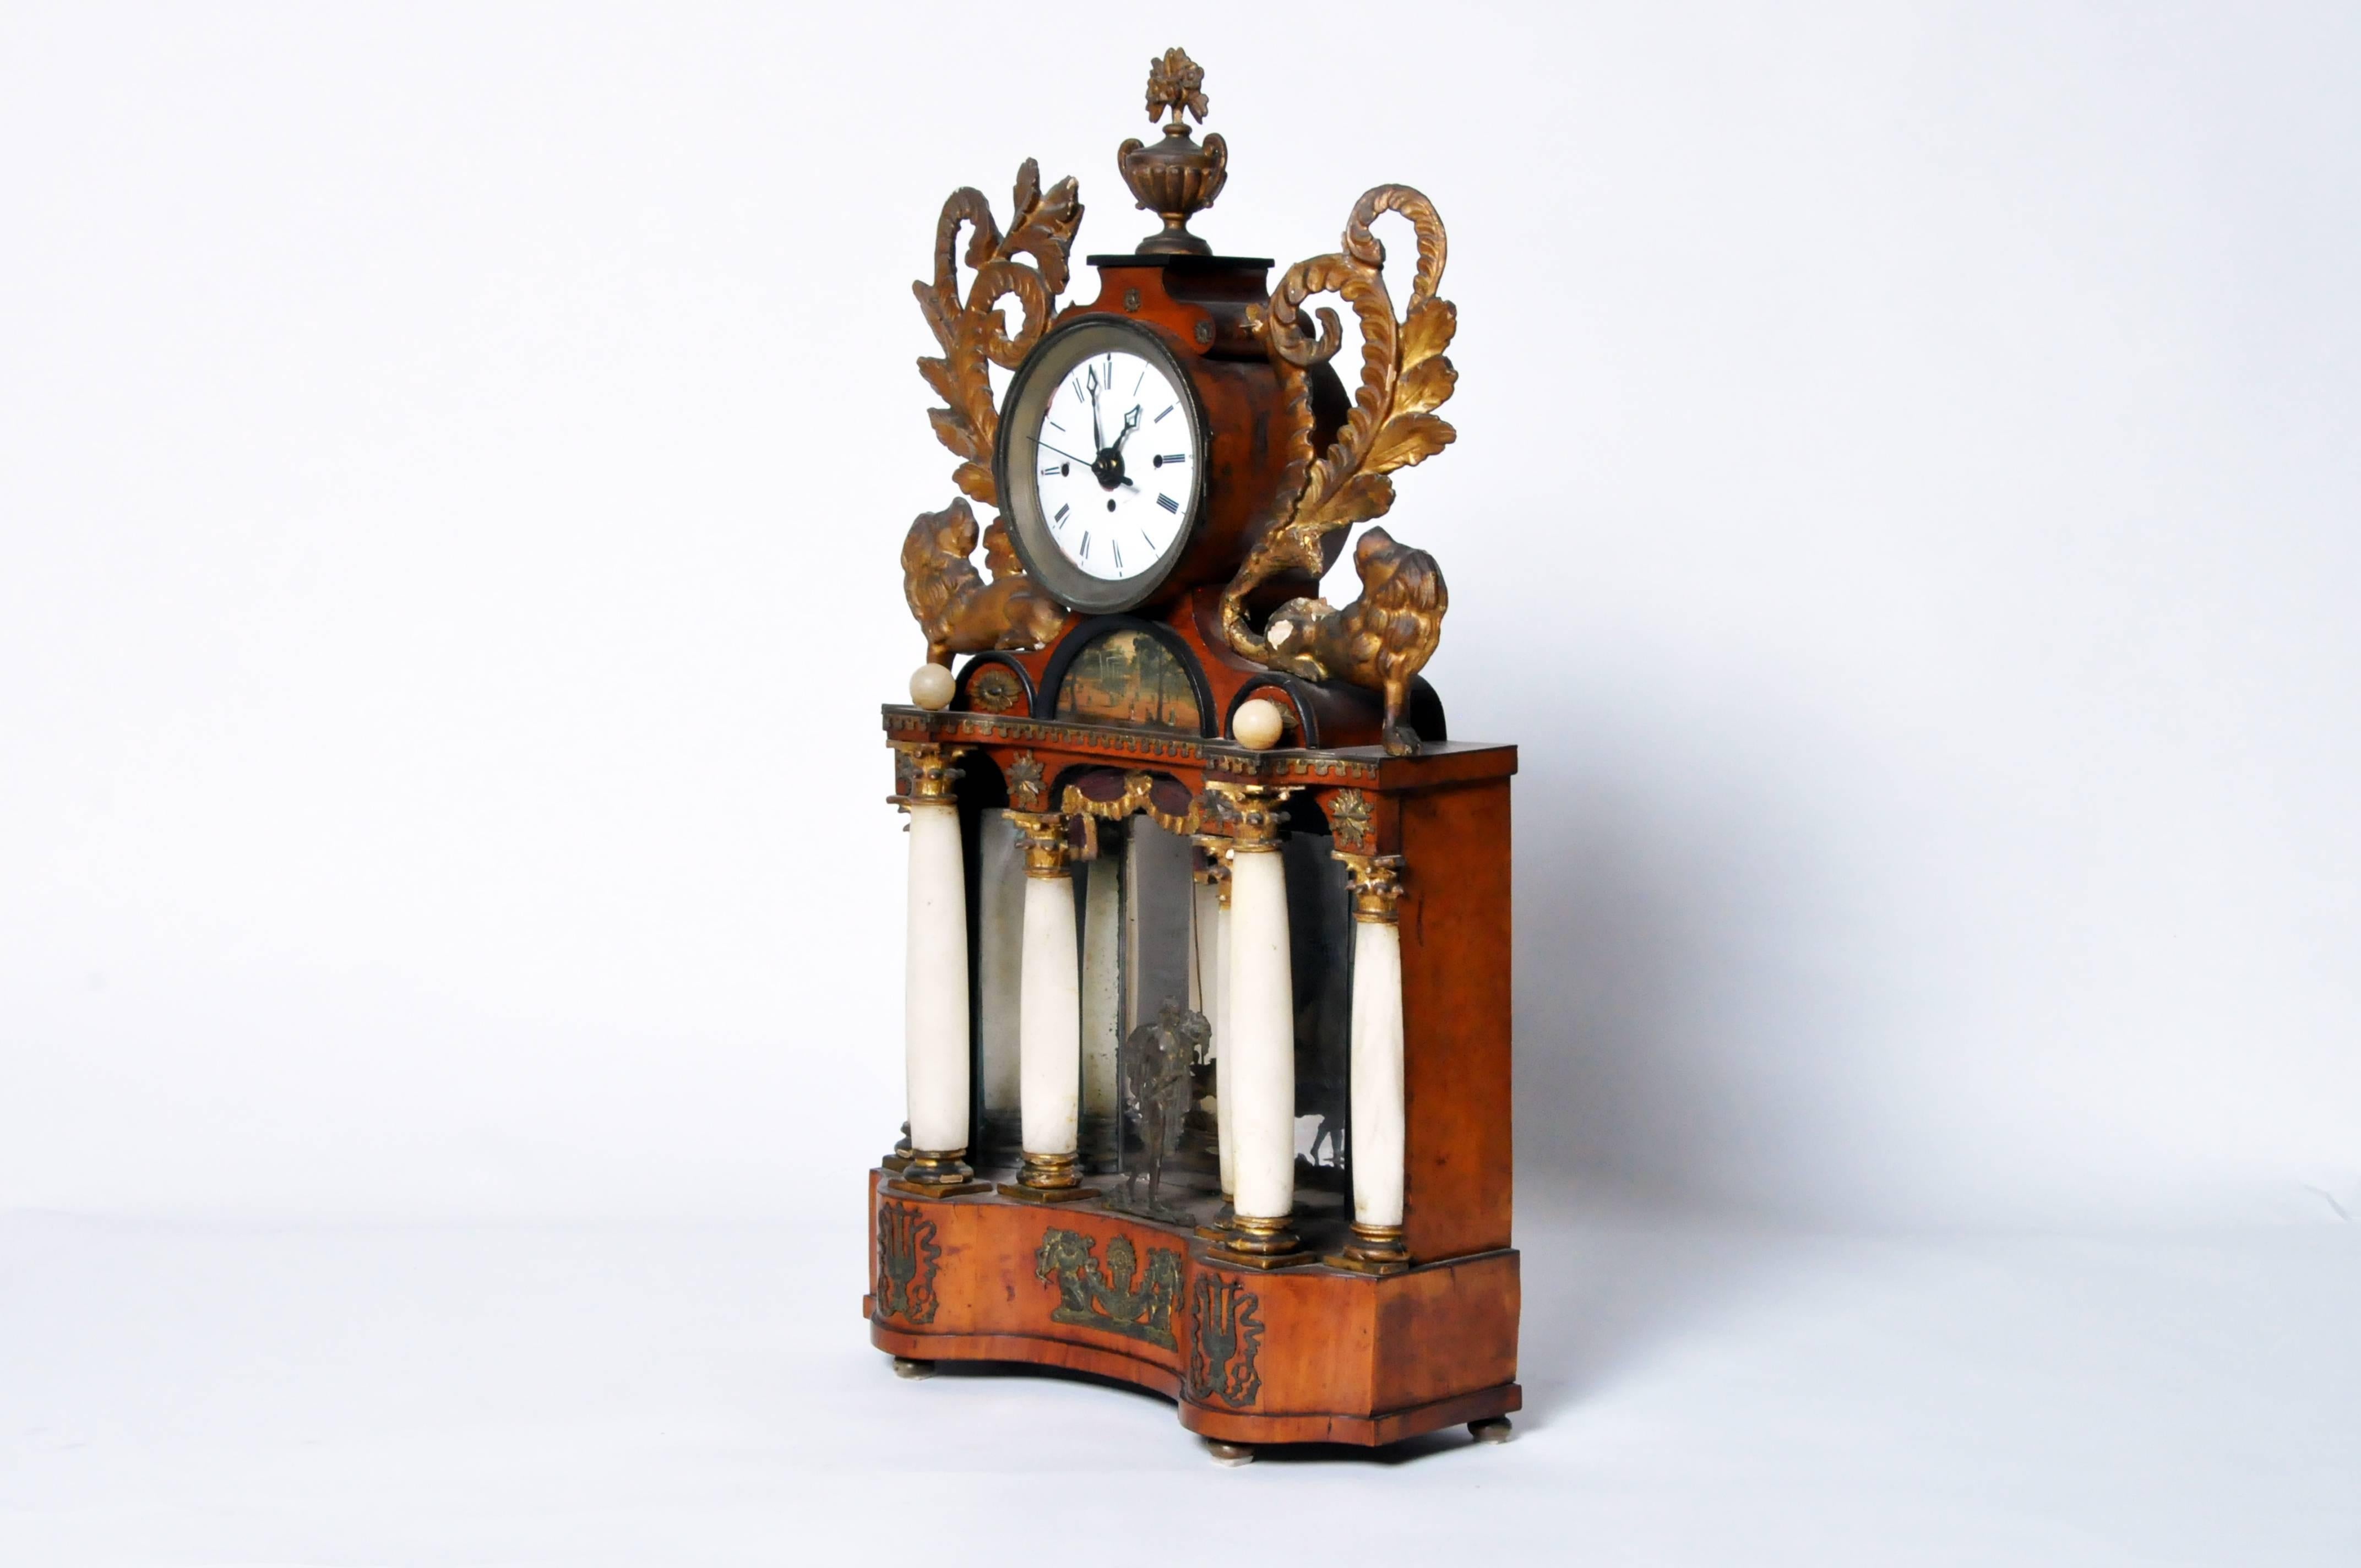 This gorgeous alabaster mantel clock is from Austria, circa 1900. This piece is made from alabaster, giltwood, and burl wood.